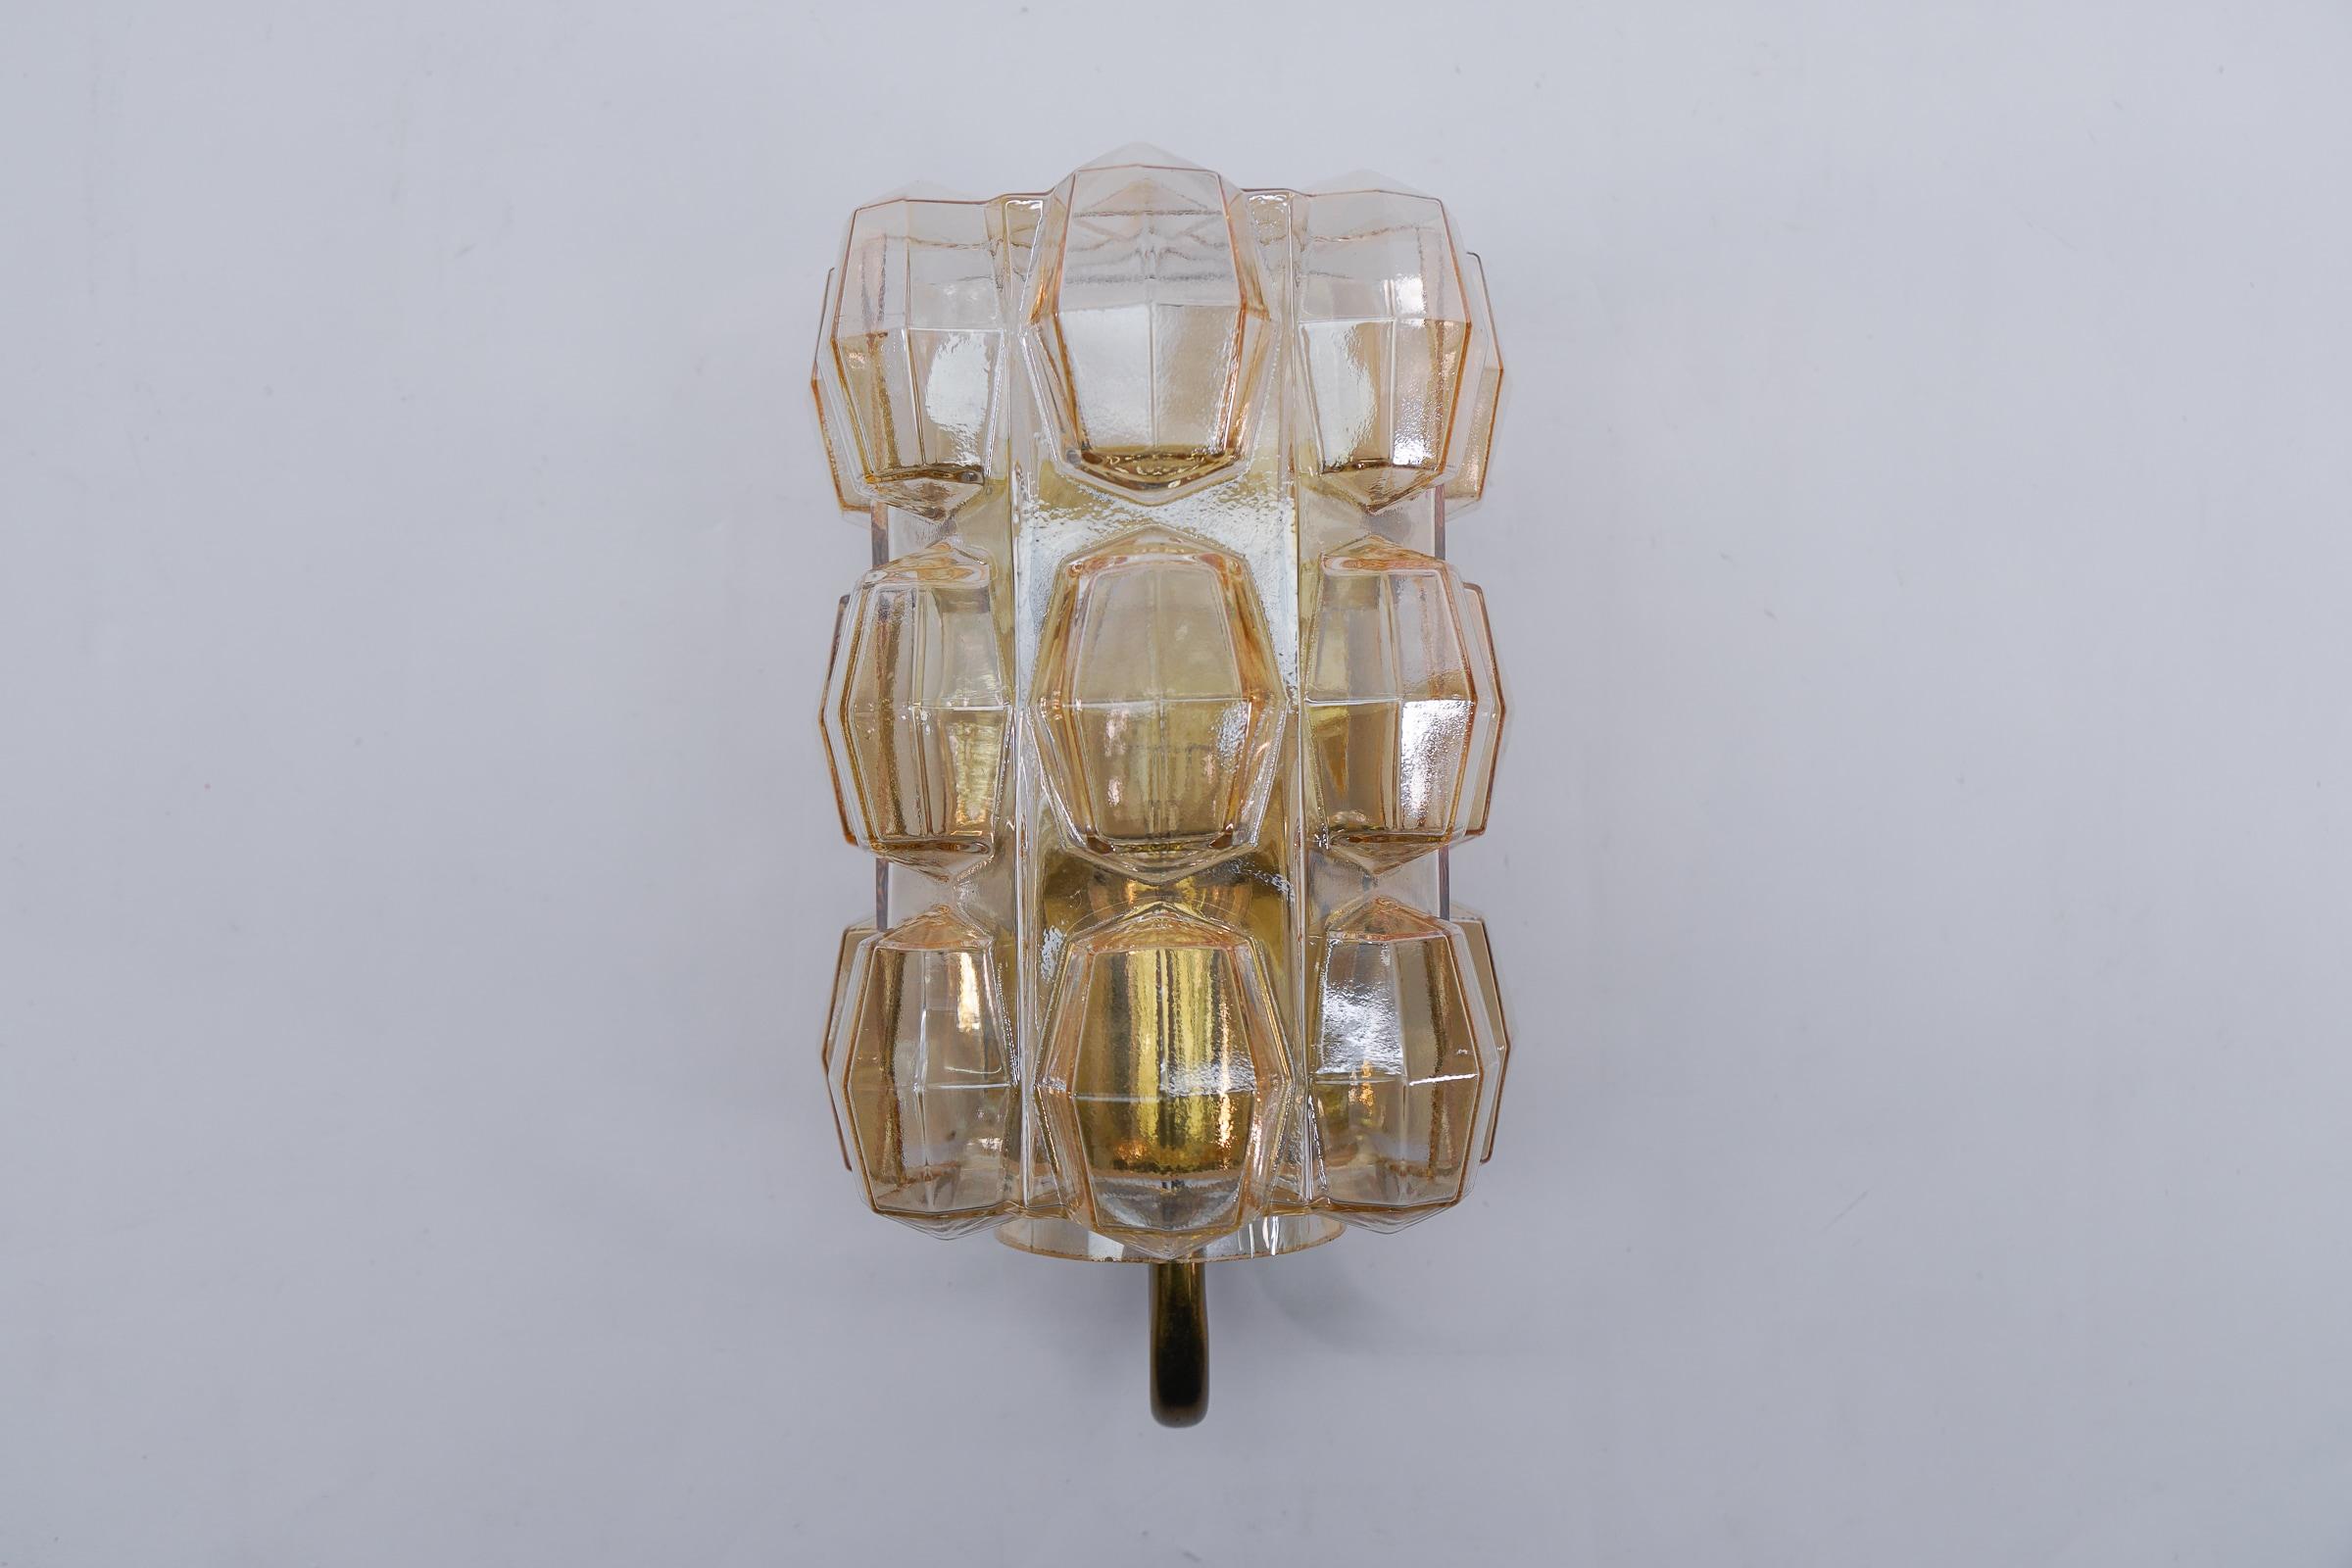 Executed in glass and metal. The lamp need 1 x E14 / E15 Edison screw fit bulb is wired, in working condition and runs both on 110 / 230 volt. Dimmable.

Our lamps are checked, cleaned and are suitable for use in the USA.